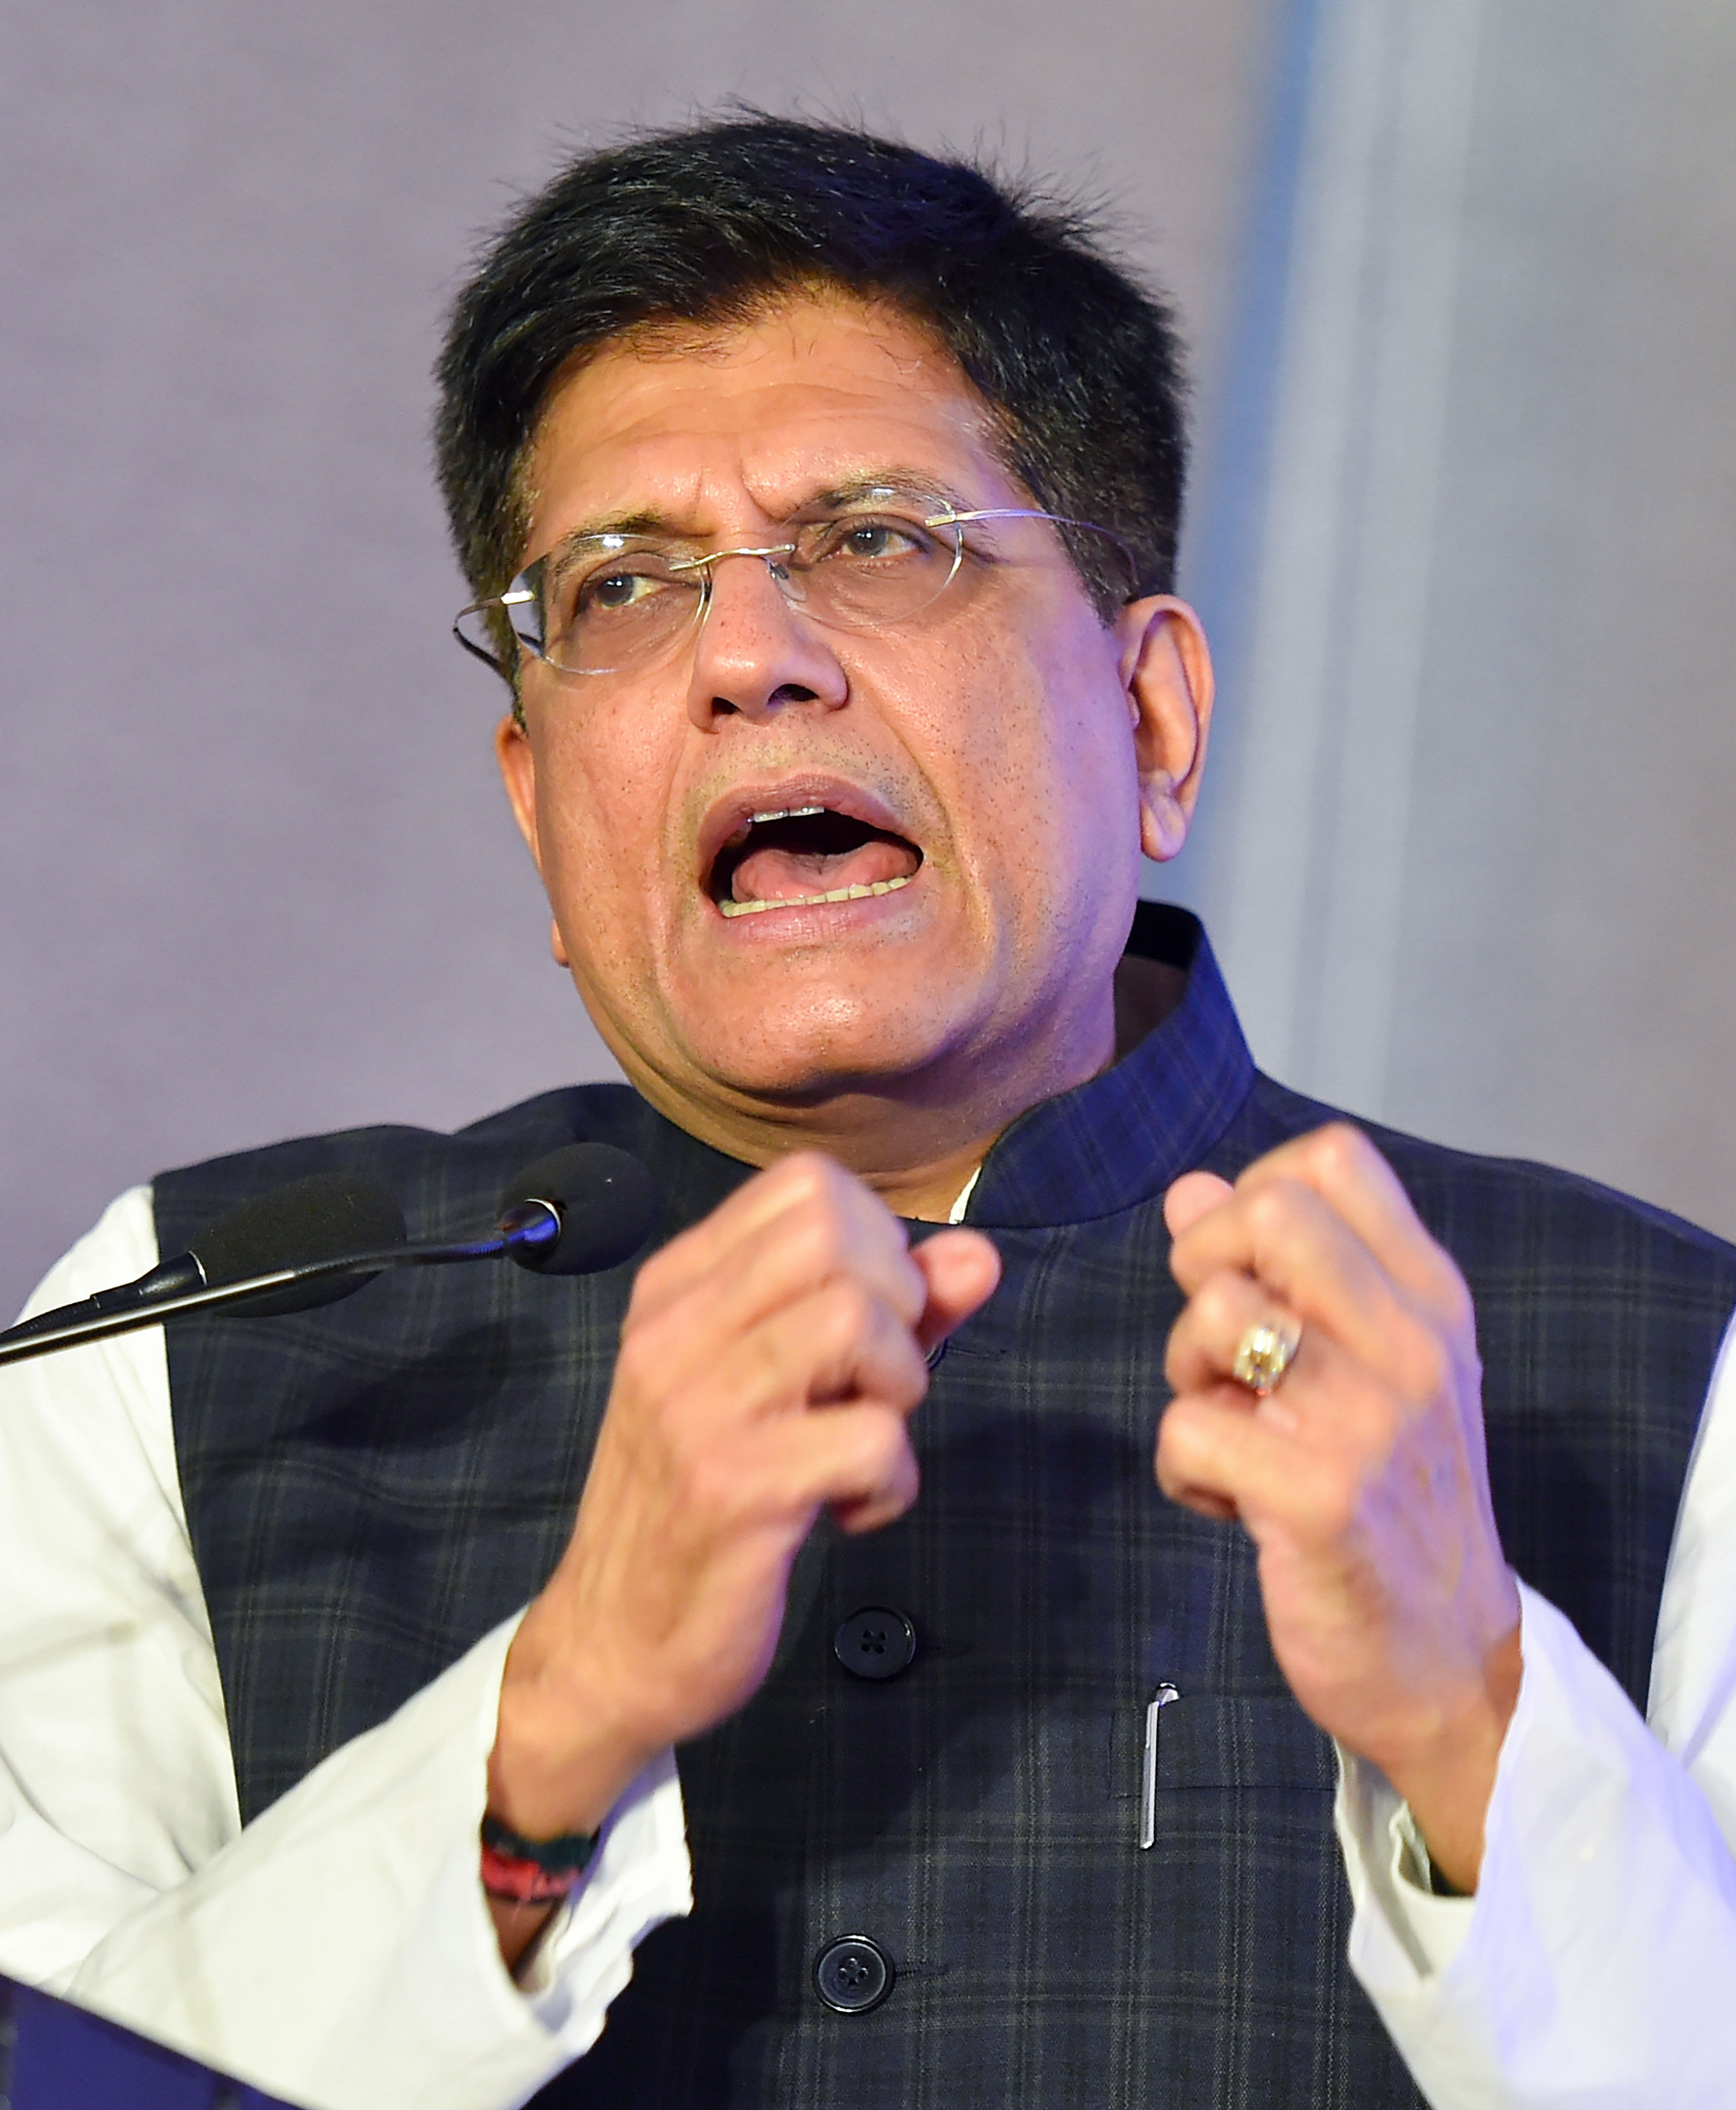 Union Minister of Commerce and Industry & Railways Piyush Goyal speaks at Kashmironomics Conclave 2019, in New Delhi, Wednesday, Nov. 27, 2019. (PTI Photo)